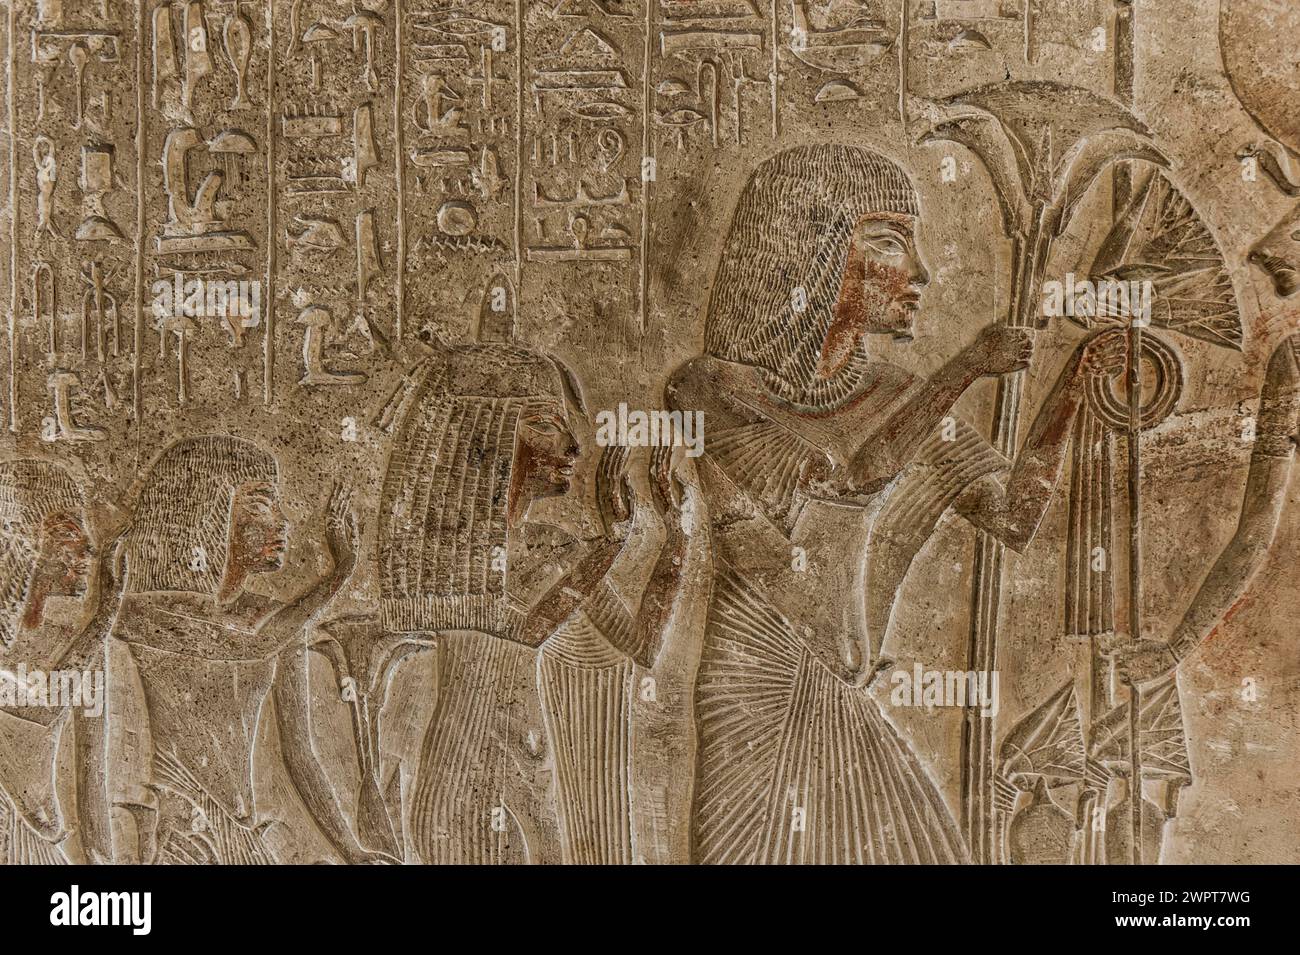 Hieroglyphs on a plate as a relief, message, drawing, Egyptian, kingdom, antiquity, world history, history, tradition, culture, cultural history Stock Photo